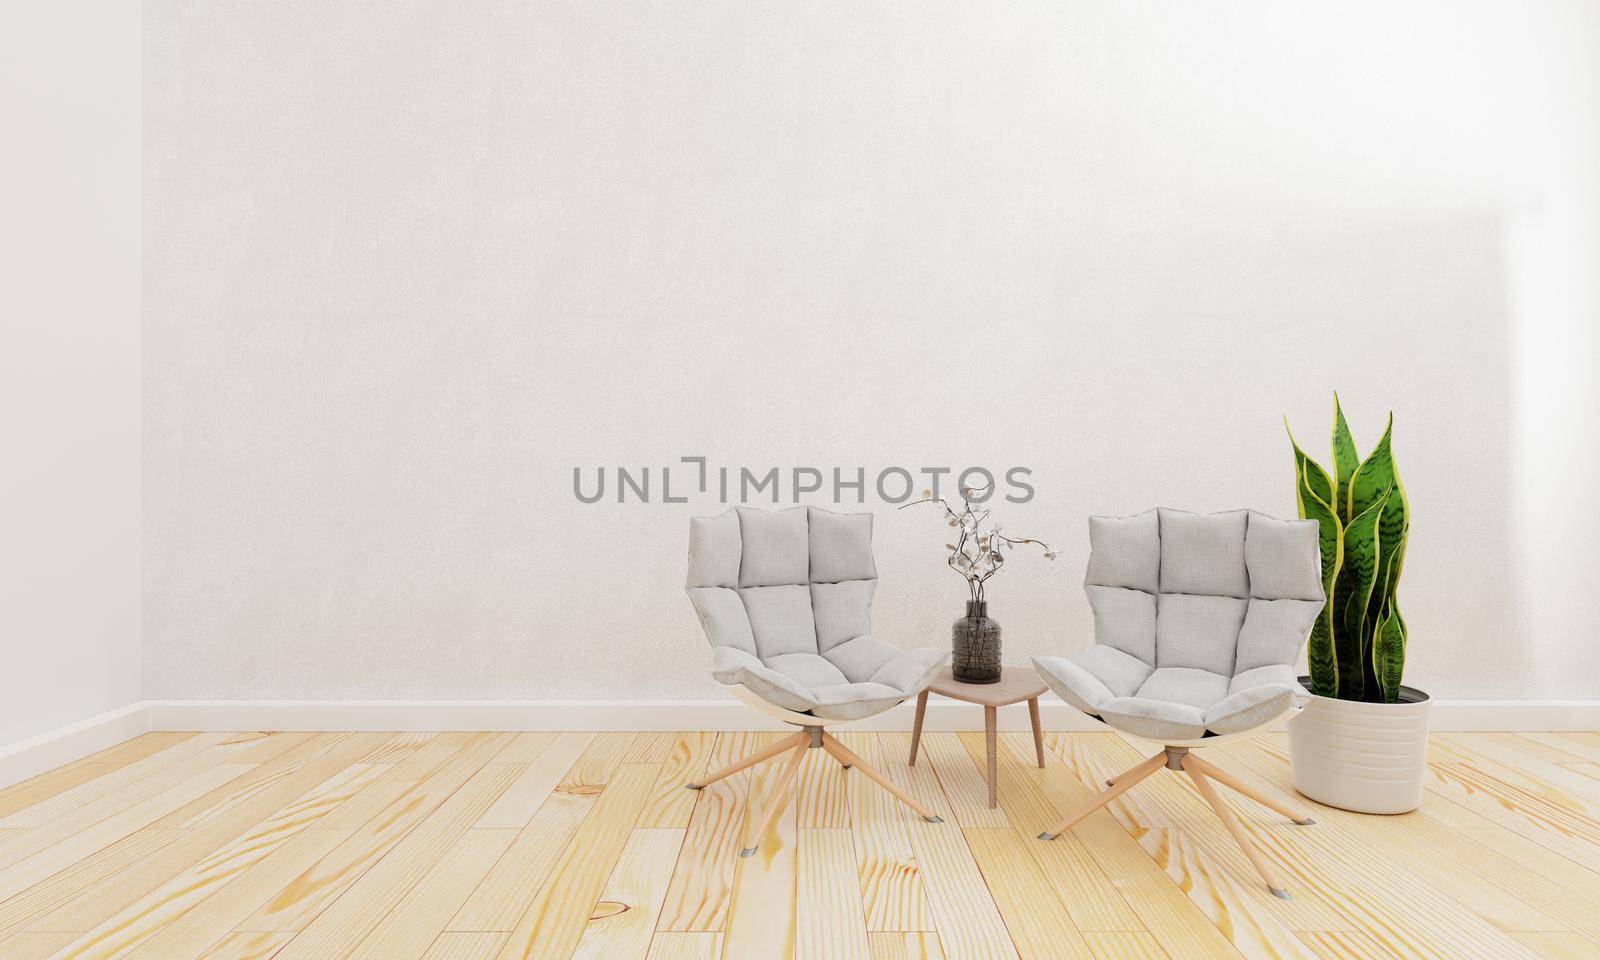 Modern living room at home with copy space wall background. Interior and Architecture concept. 3D illustration rendering by MiniStocker